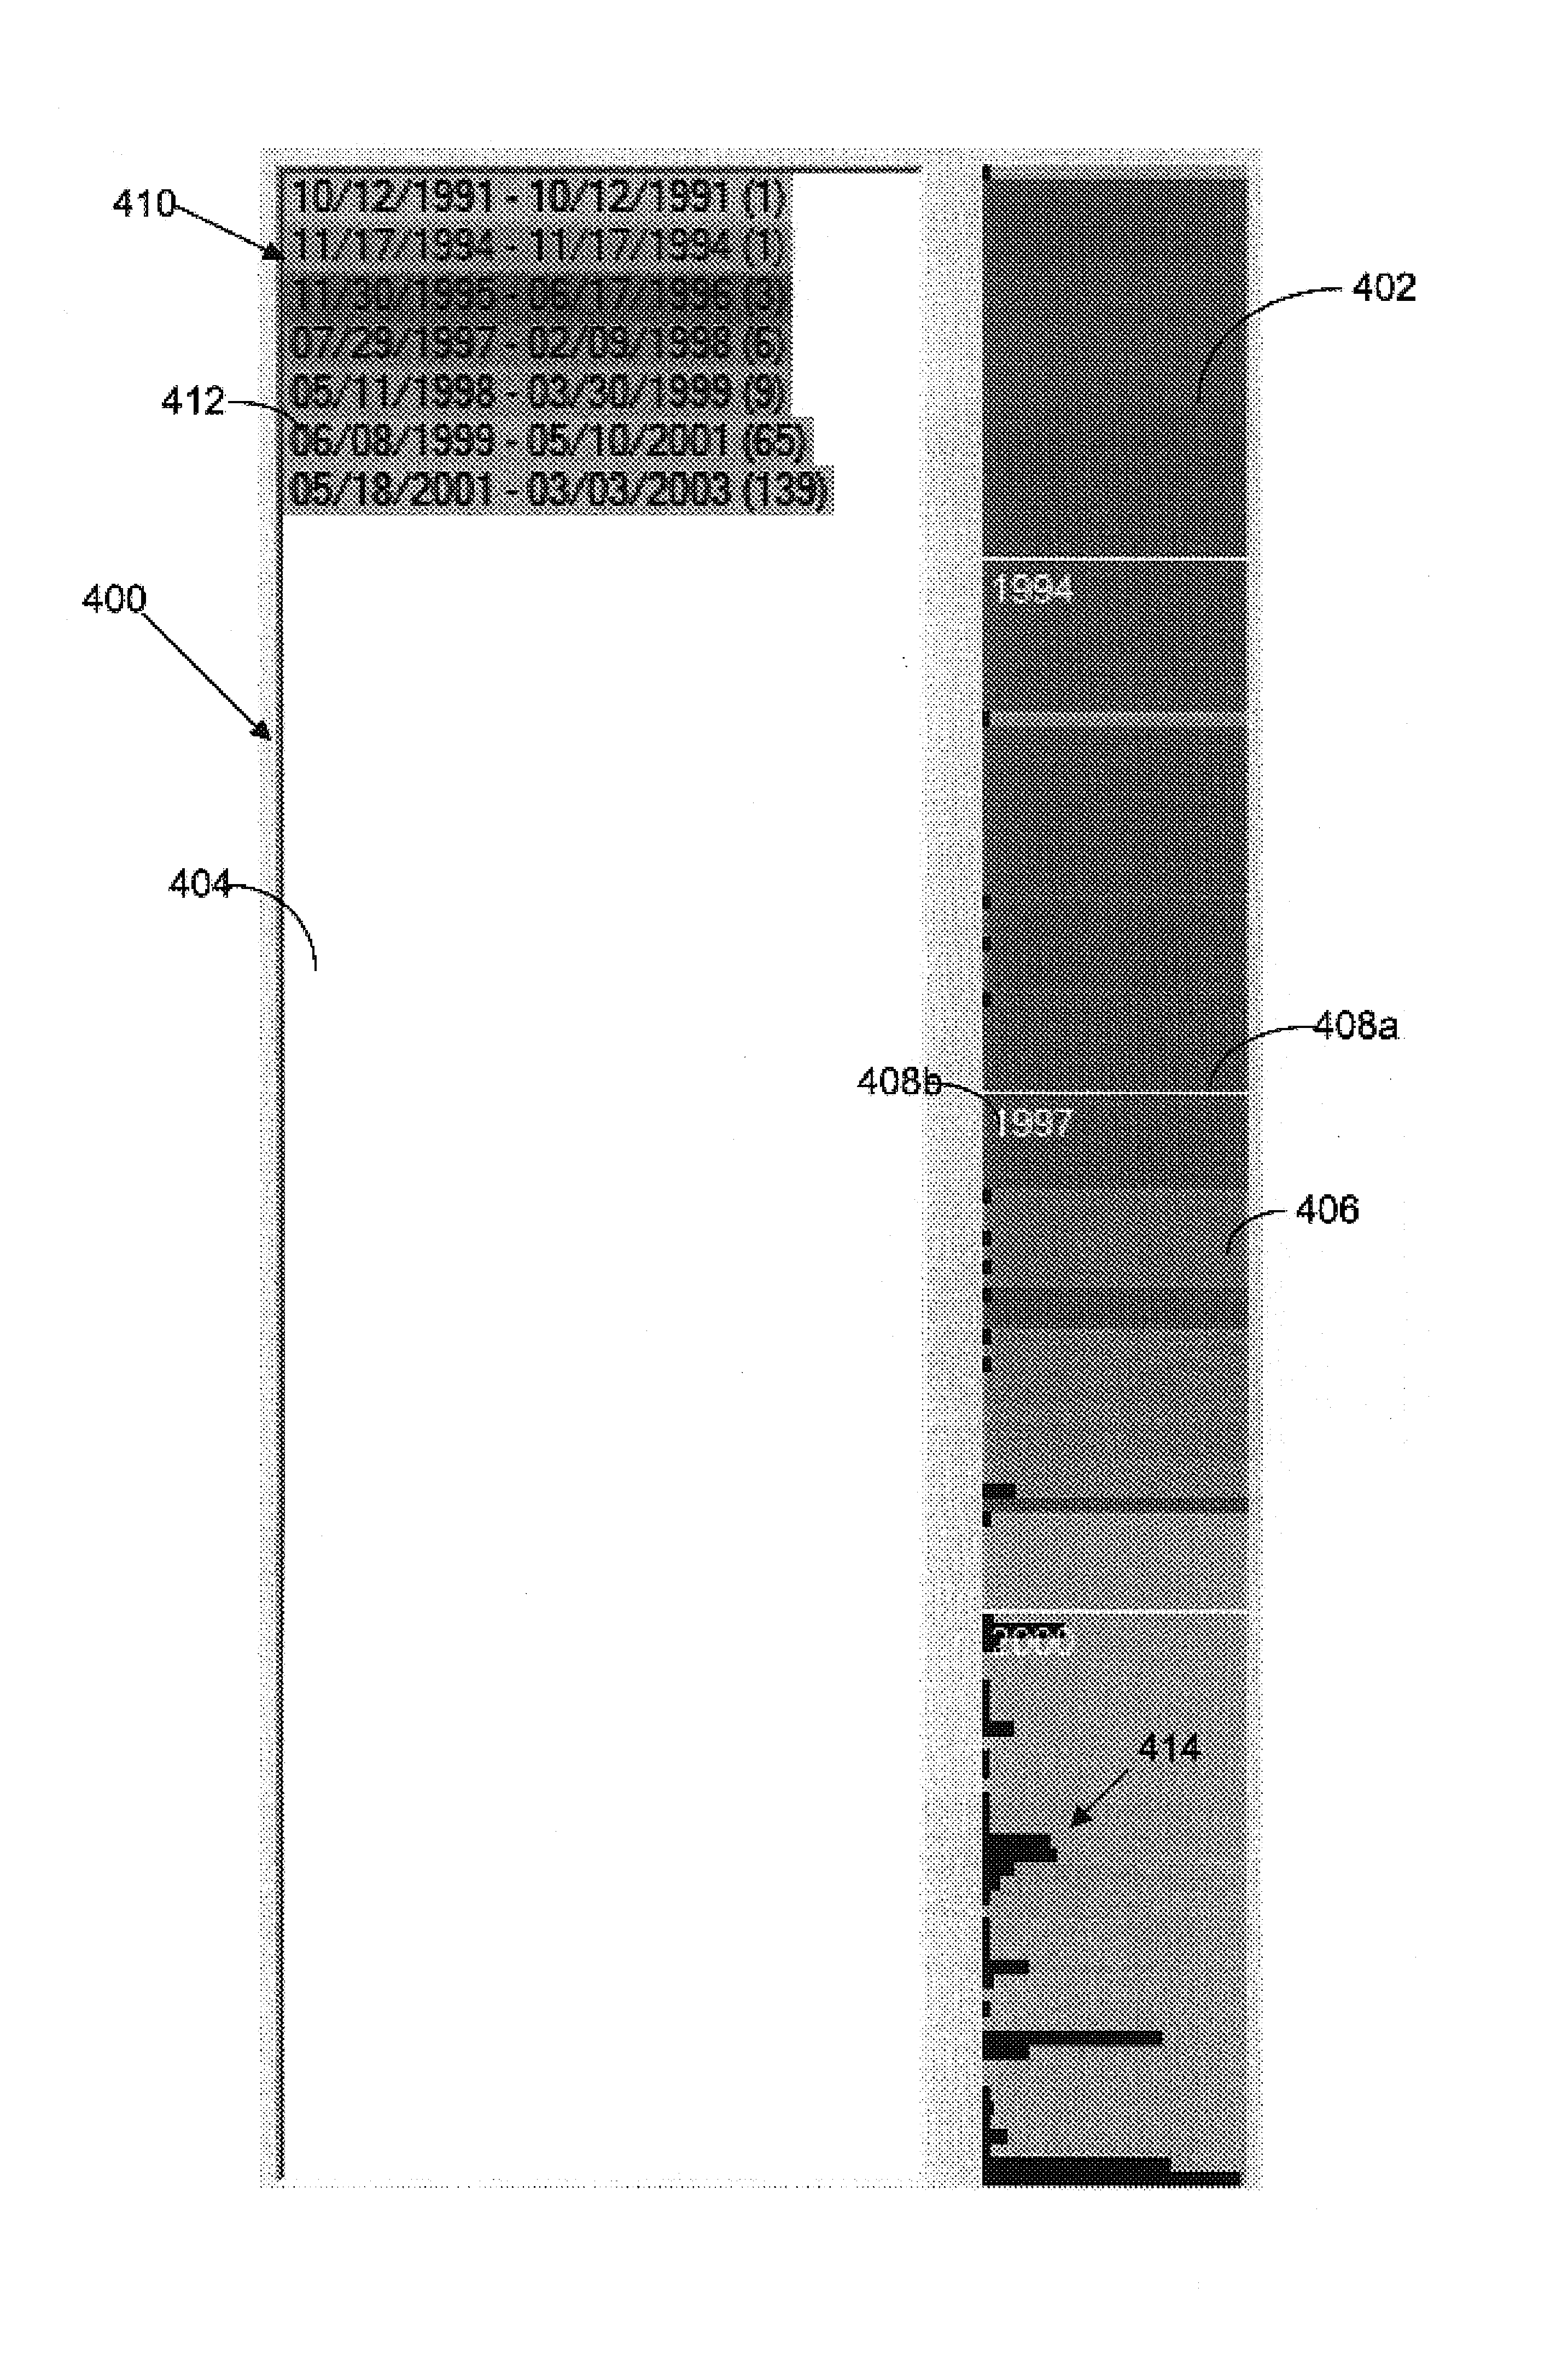 System and process for presenting search results in a histogram/cluster format